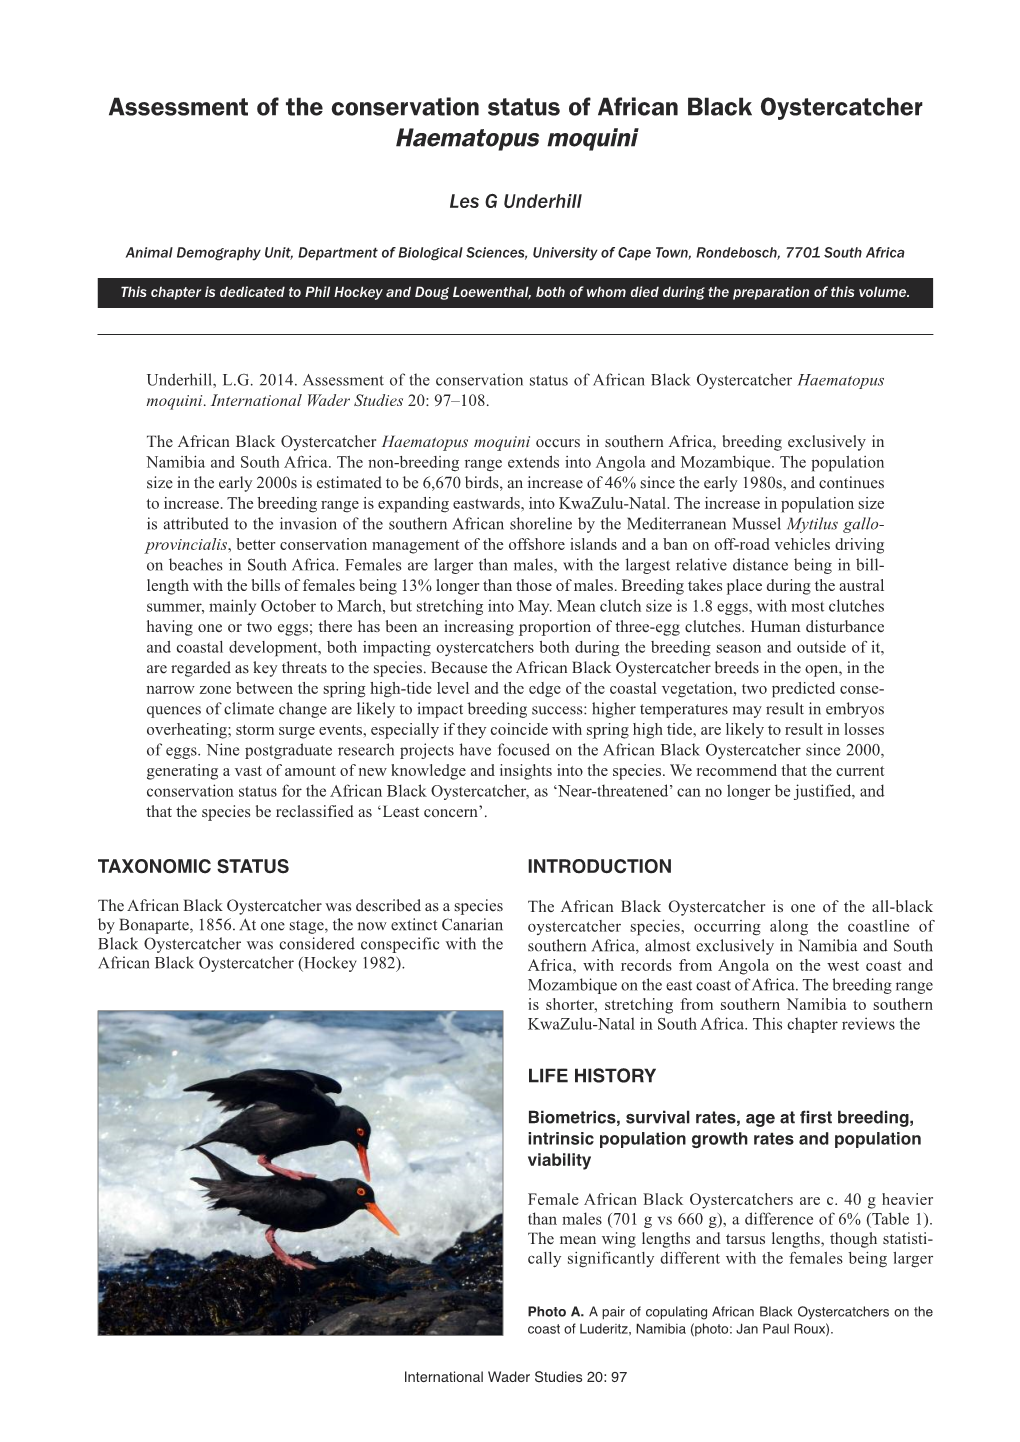 Assessment of the Conservation Status of African Black Oystercatcher Haematopus Moquini